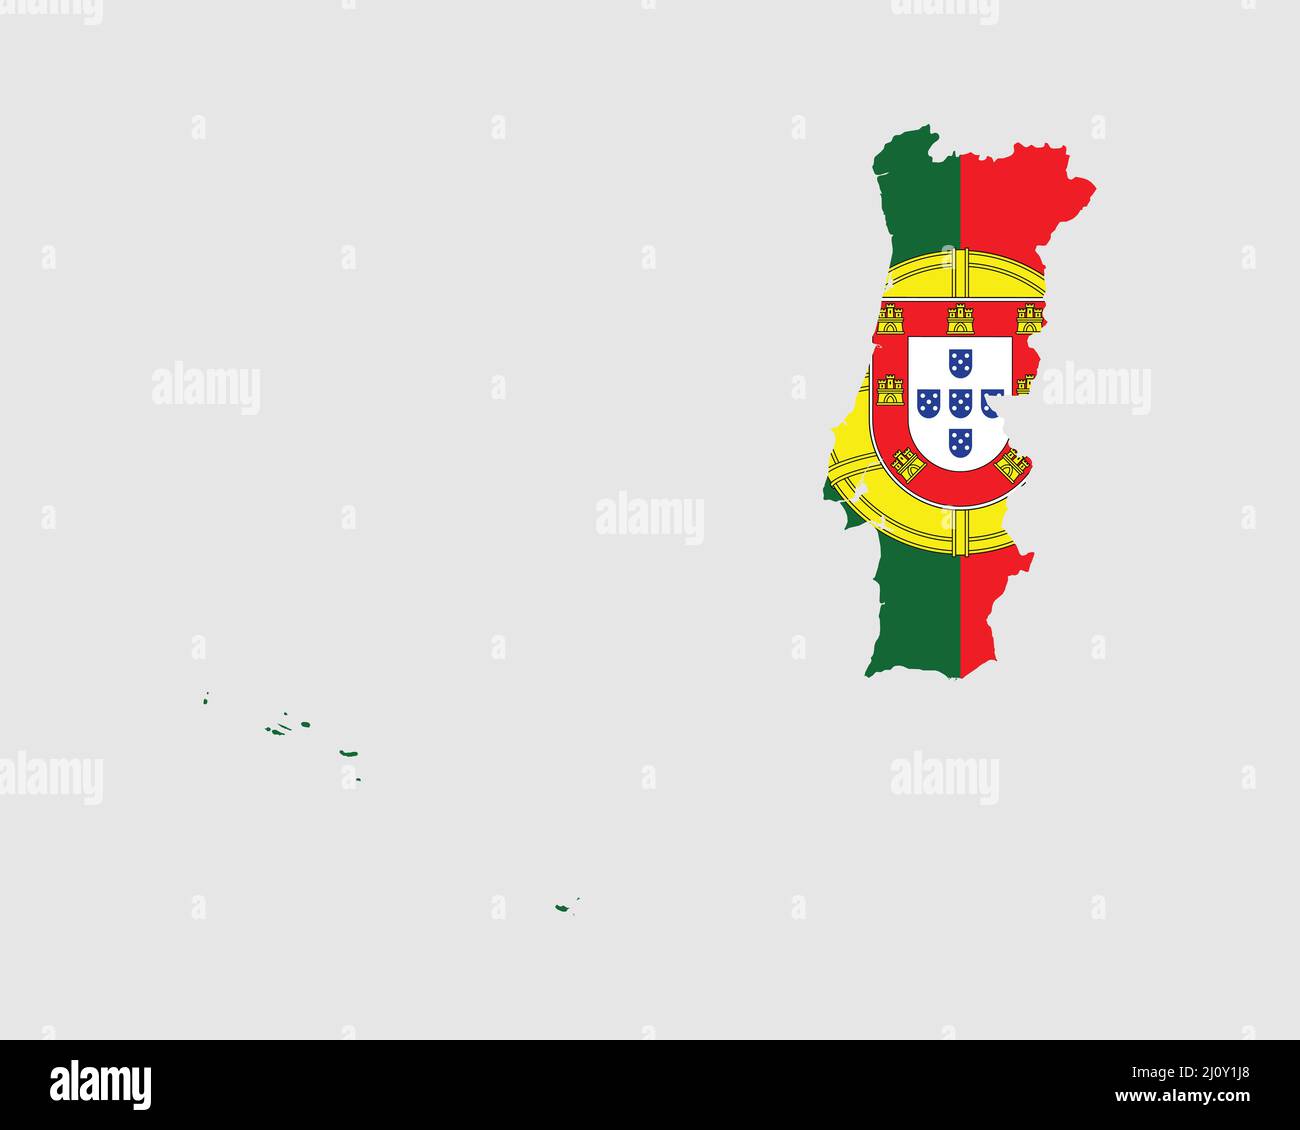 Districts of Portugal. Map of Regional Country Administrative Divisions  Stock Vector - Illustration of administrative, divided: 146003119